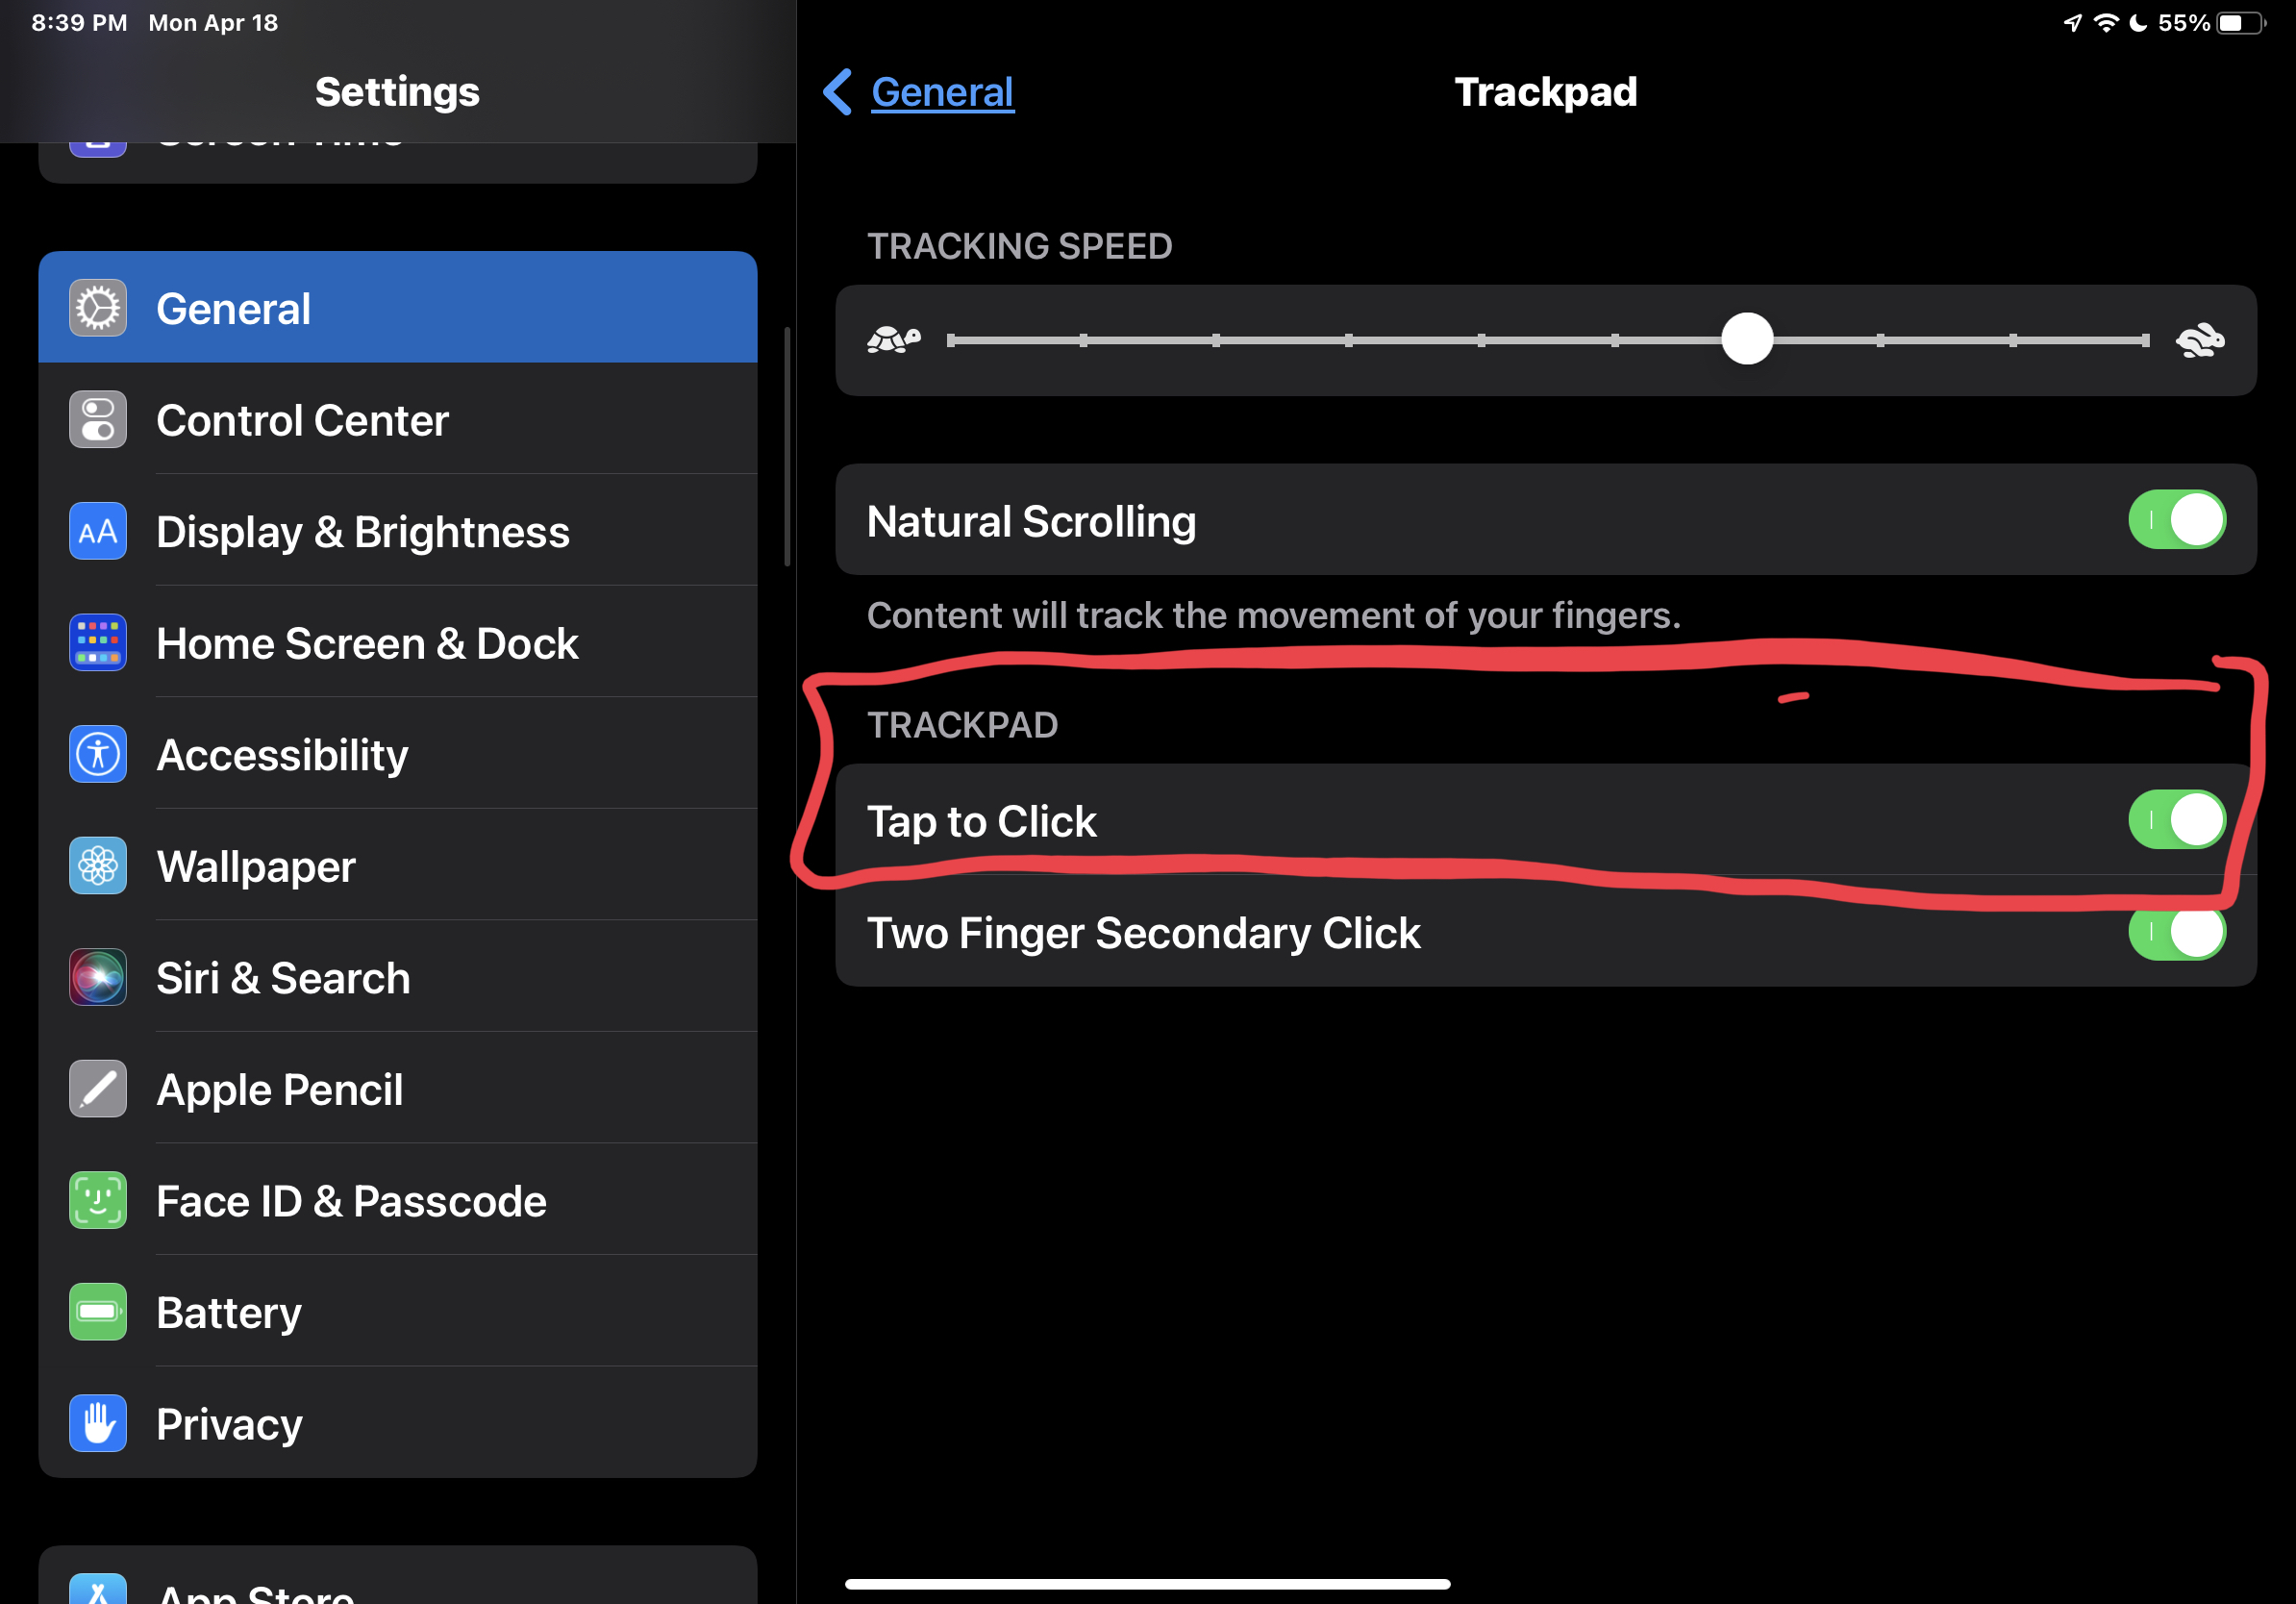 How to Enable Tap to Click on Trackpad with iPad